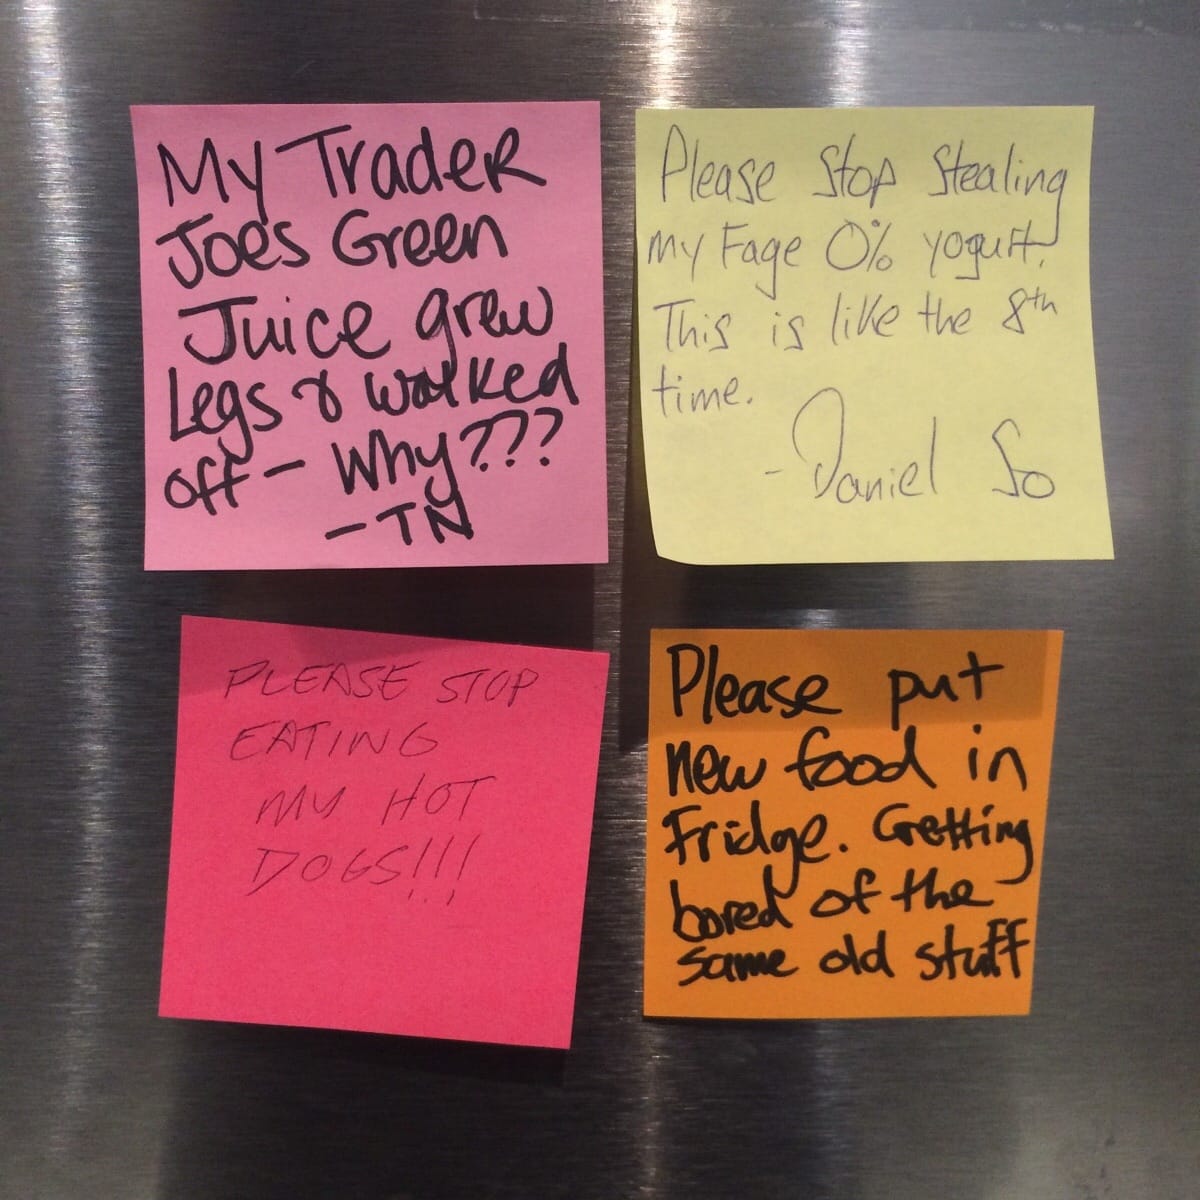 passive aggressive fridge notes - My Trader Joe's Green Juice grew Legs & walked Please Stop Stealing my Fage 0% yogurt This is the 8th time. Daniel So off Why??? Please Stop Eating ms Hot Please put new food in Fridge. Getting bored of the same old stuff